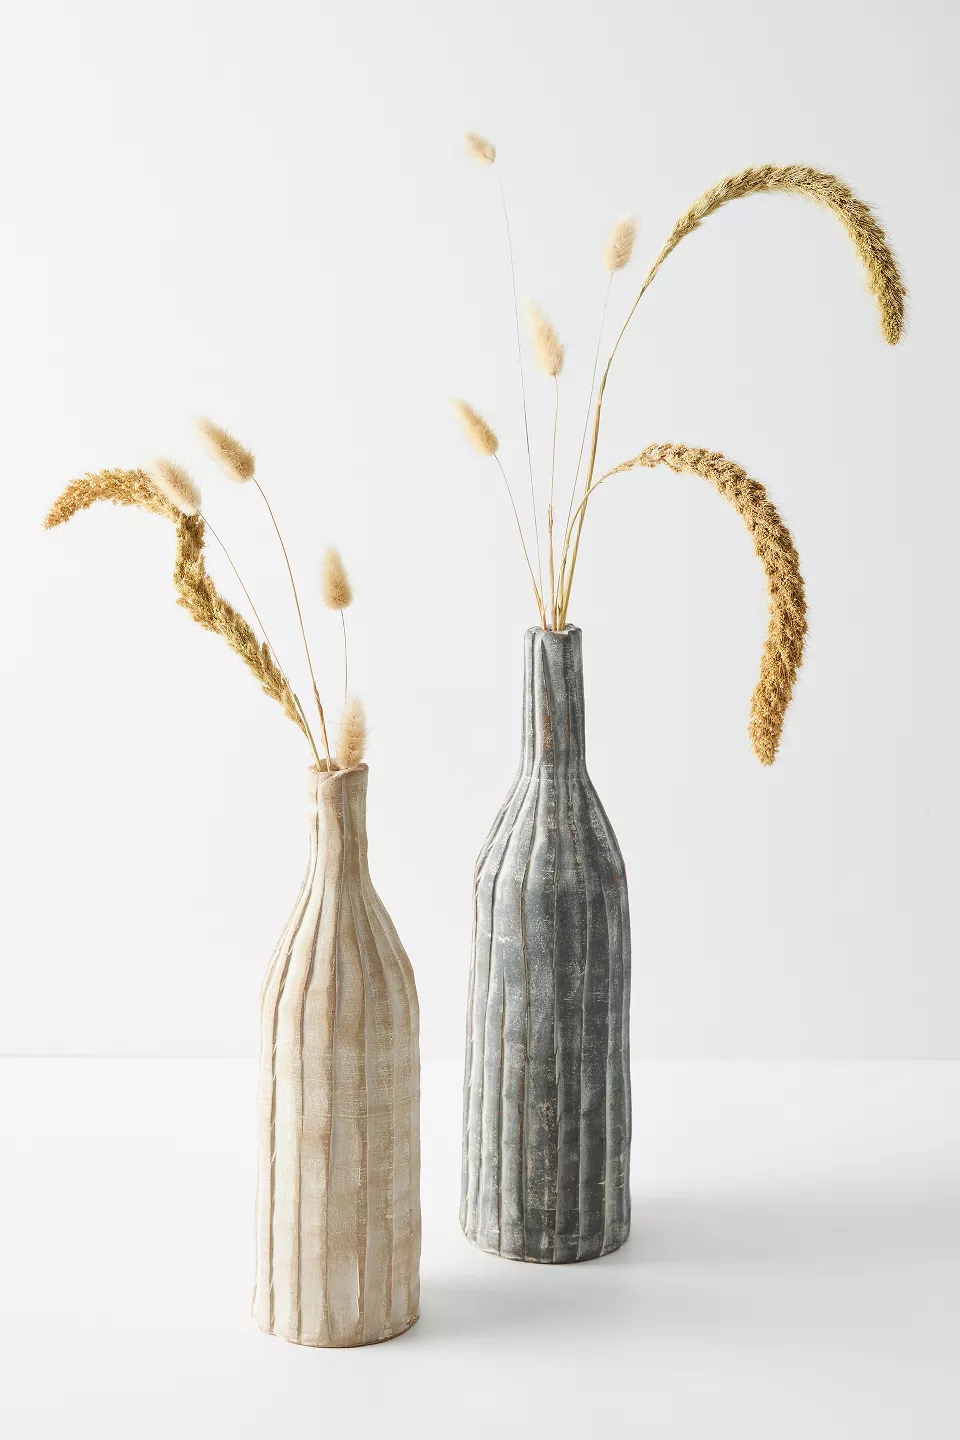 Anthropologie Ribbed Clay Decorative Vases